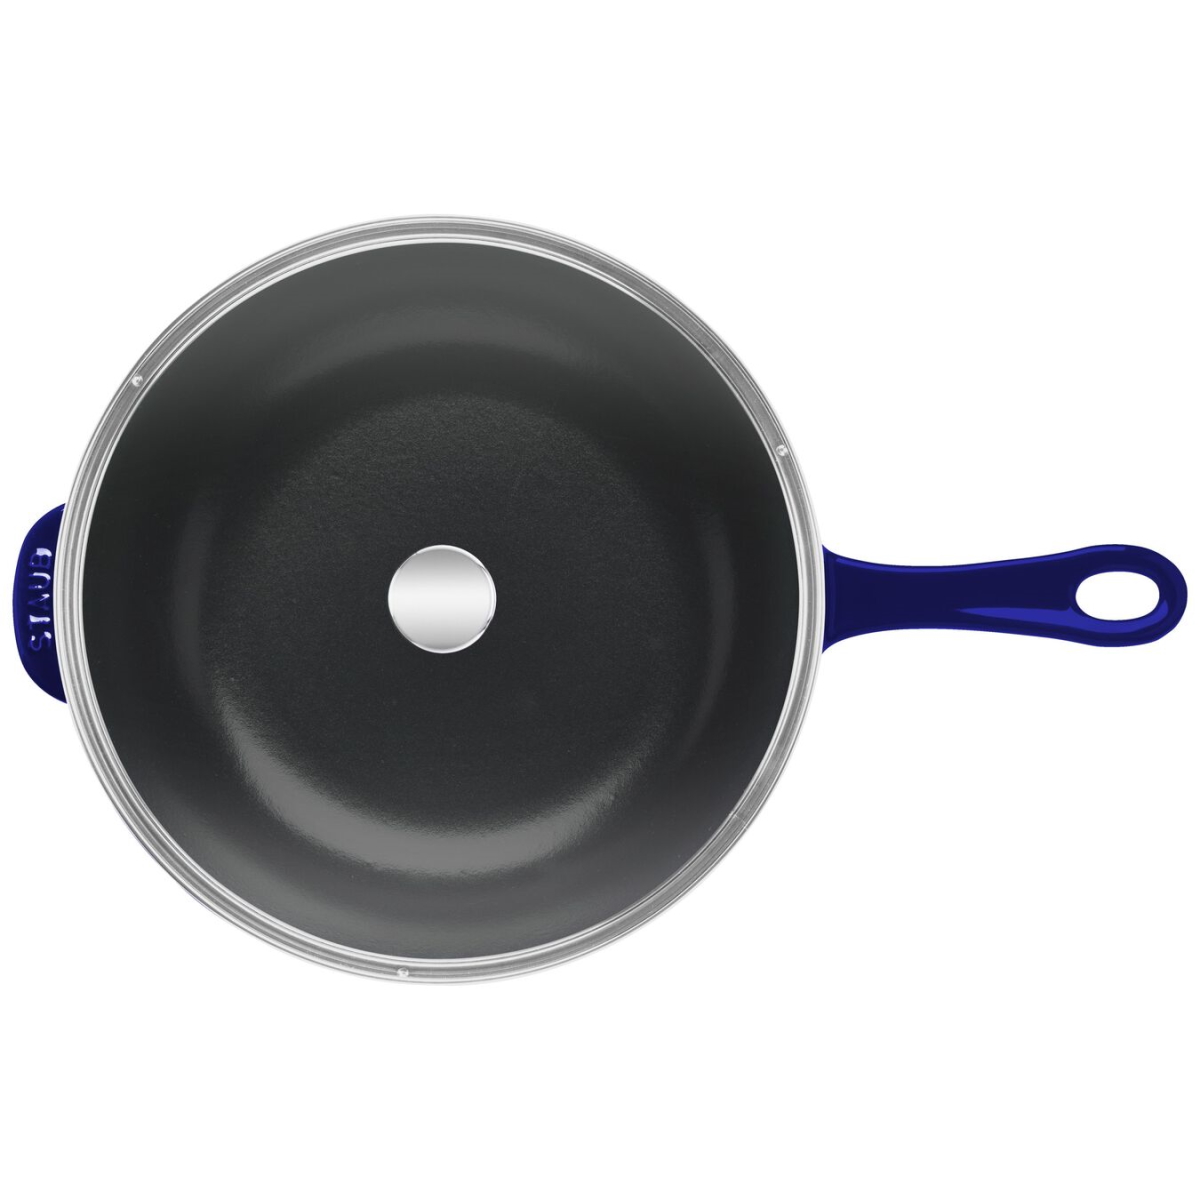 https://www.berings.com/wp-content/uploads/2023/05/Staub-Cast-Iron-10-inch-Daily-Pan-with-Glass-Lid-Dark-Blue2.jpg